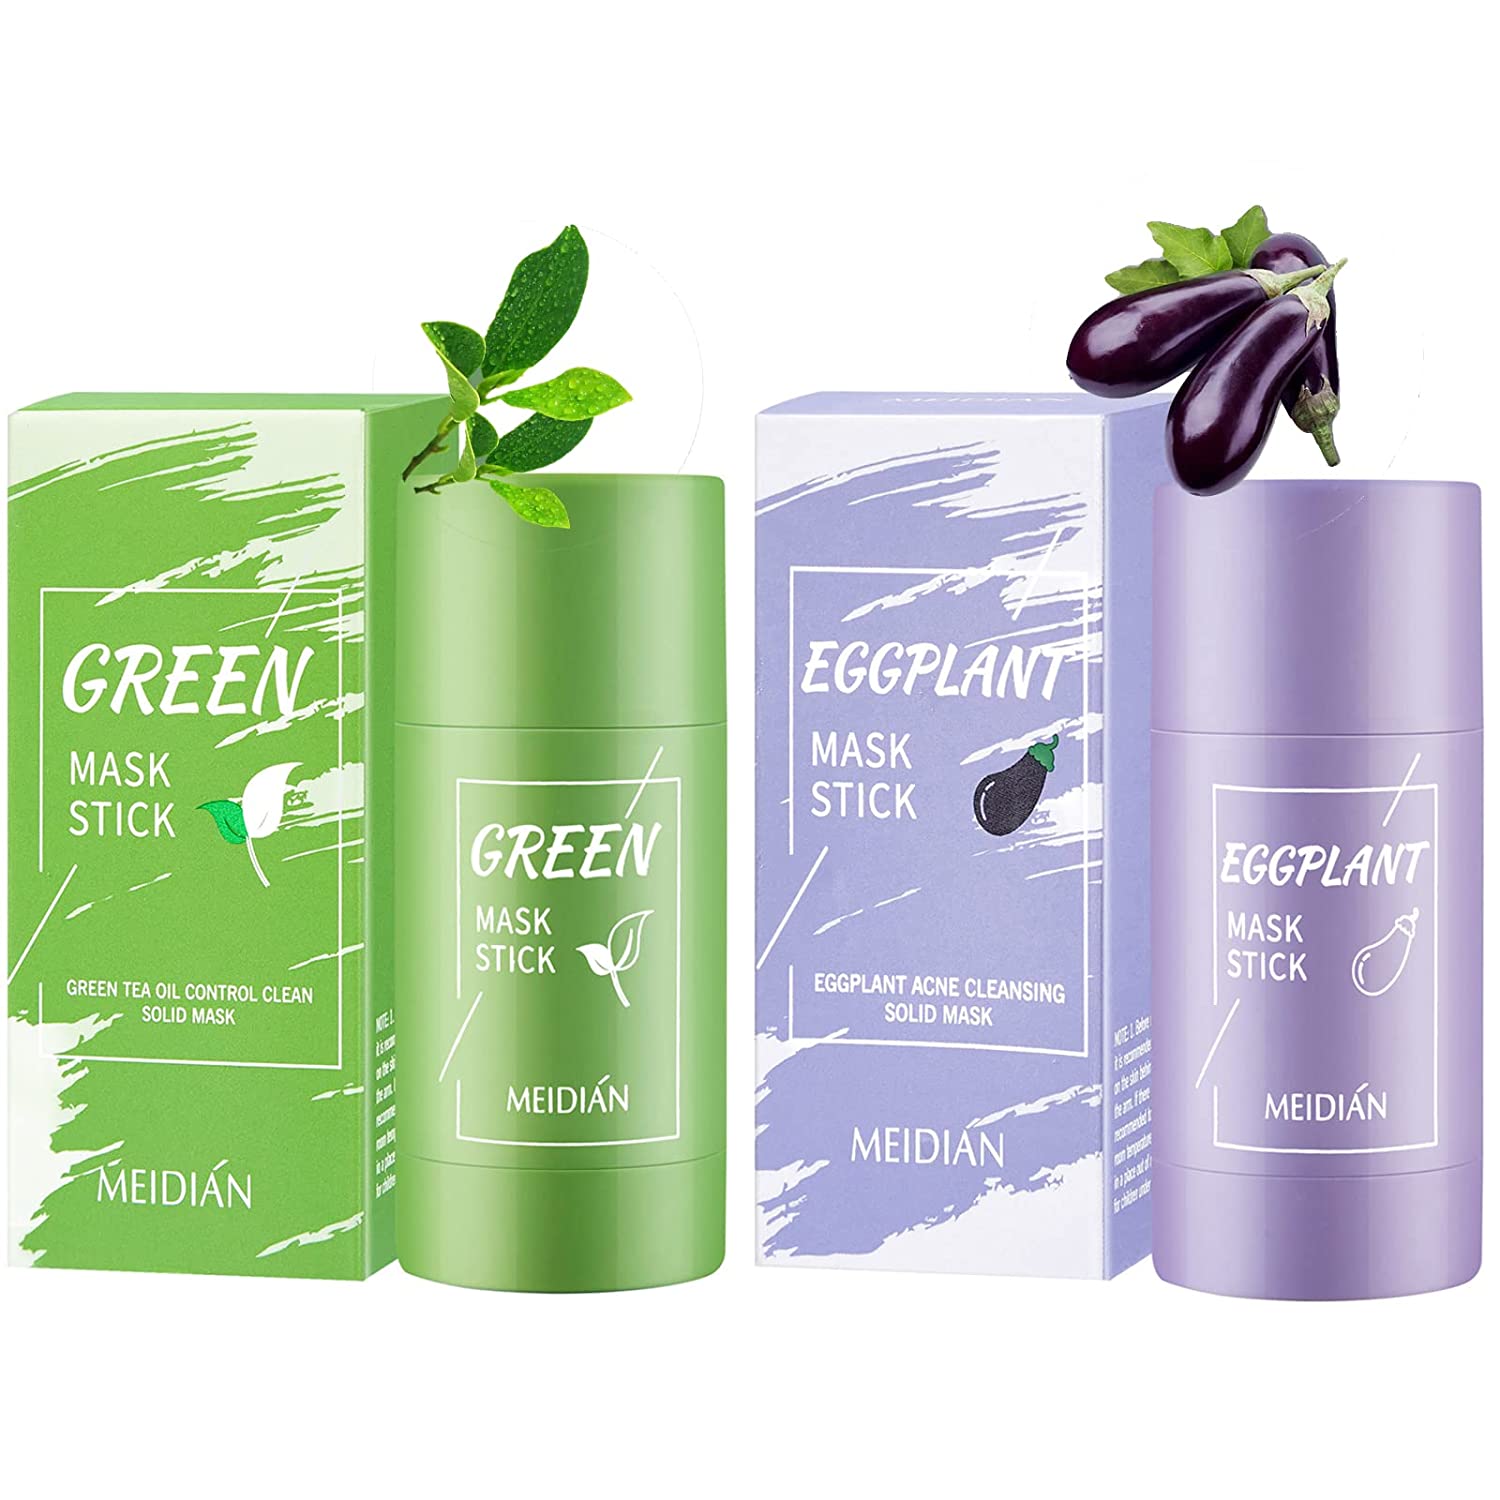 Bosuya Green Tea Mask Green Mask Clay Stick Aubergine Oil Controlled Solid Deep Cleaning Mud Film Removal Blackhead Face Mask Acne Cleaning Blackhead Remover, ‎type